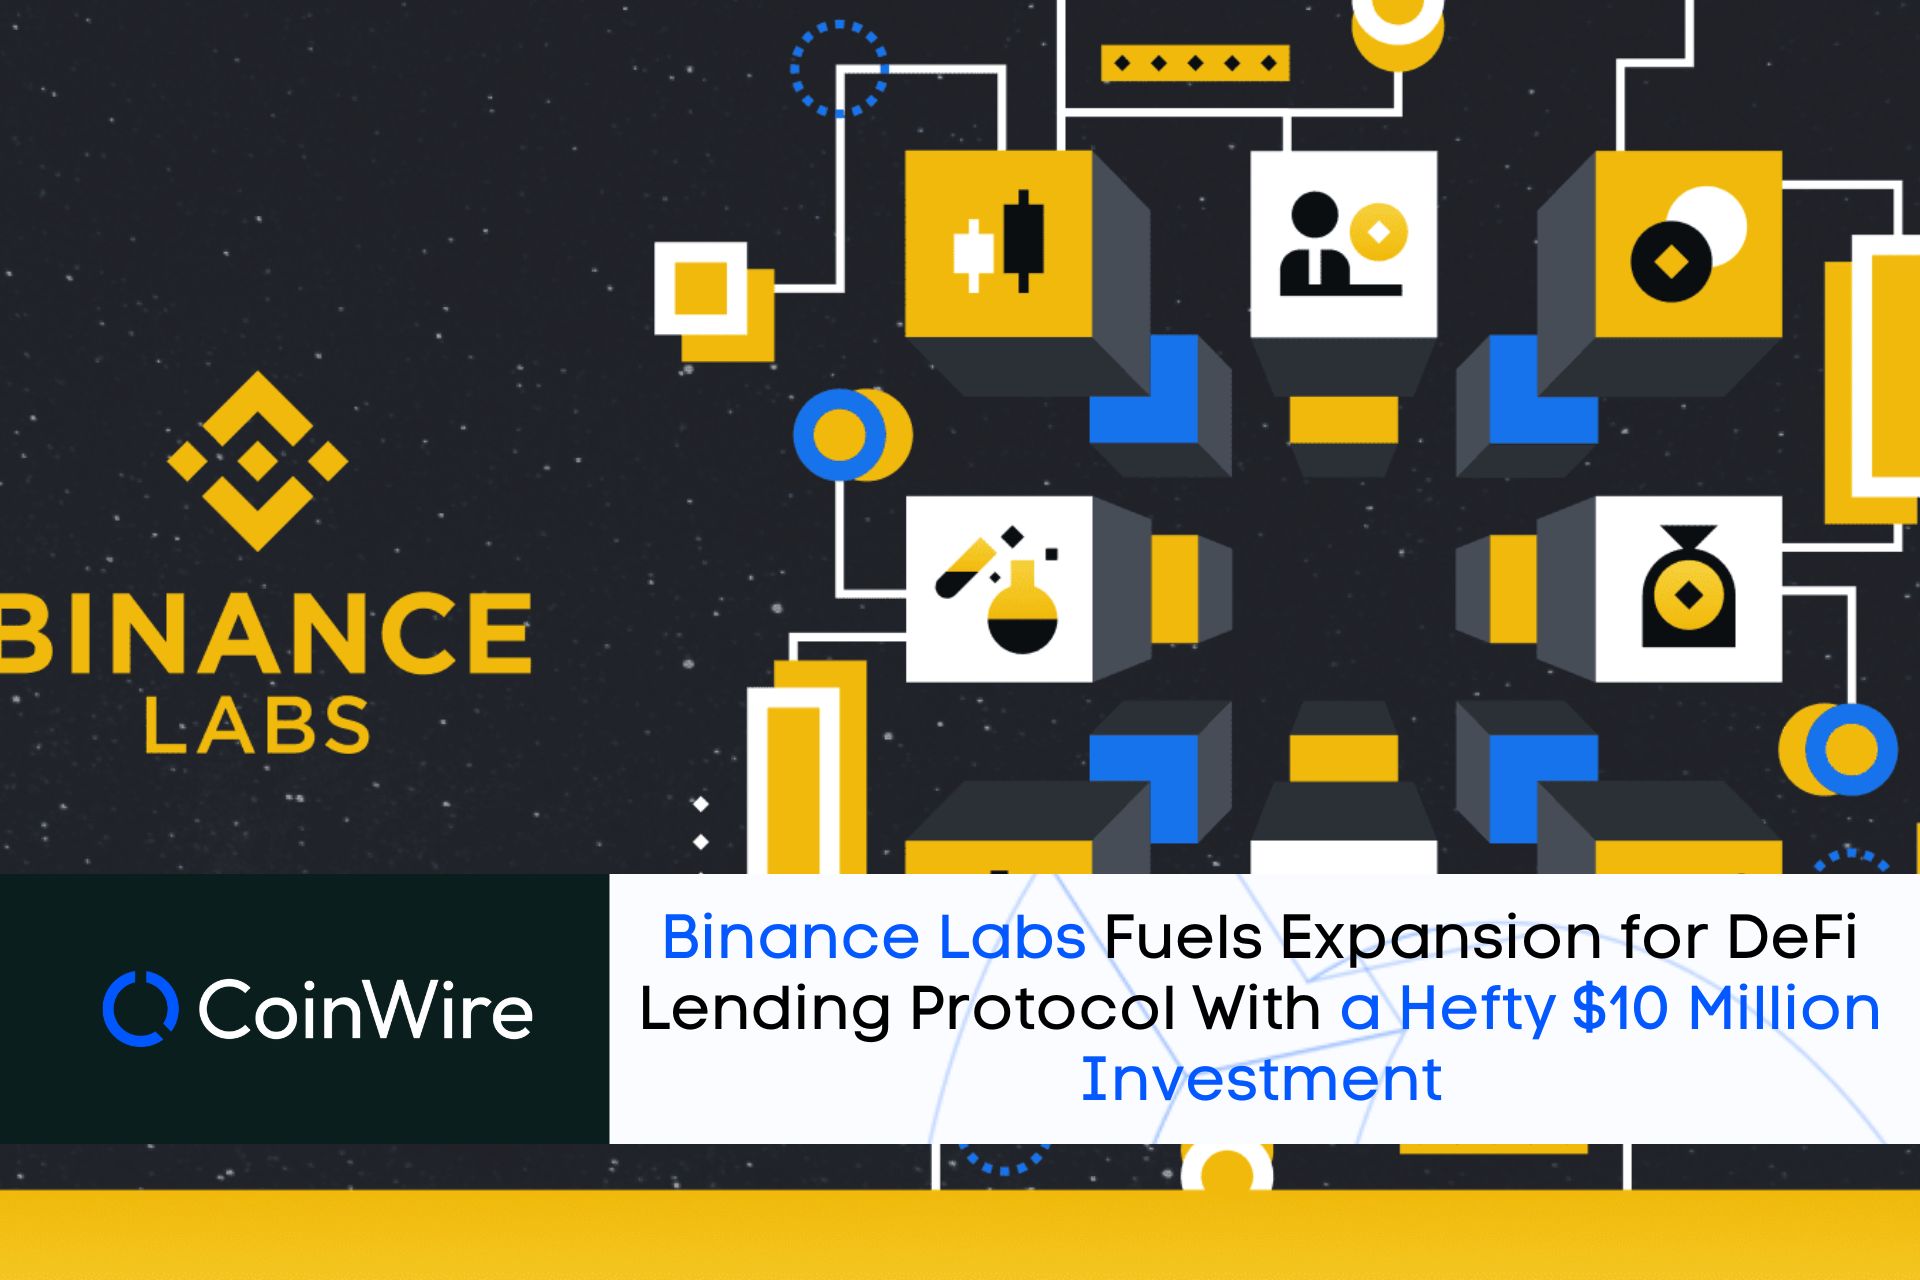 Binance Labs Fuels Expansion For Defi Lending Protocol With A Hefty $10 Million Investment